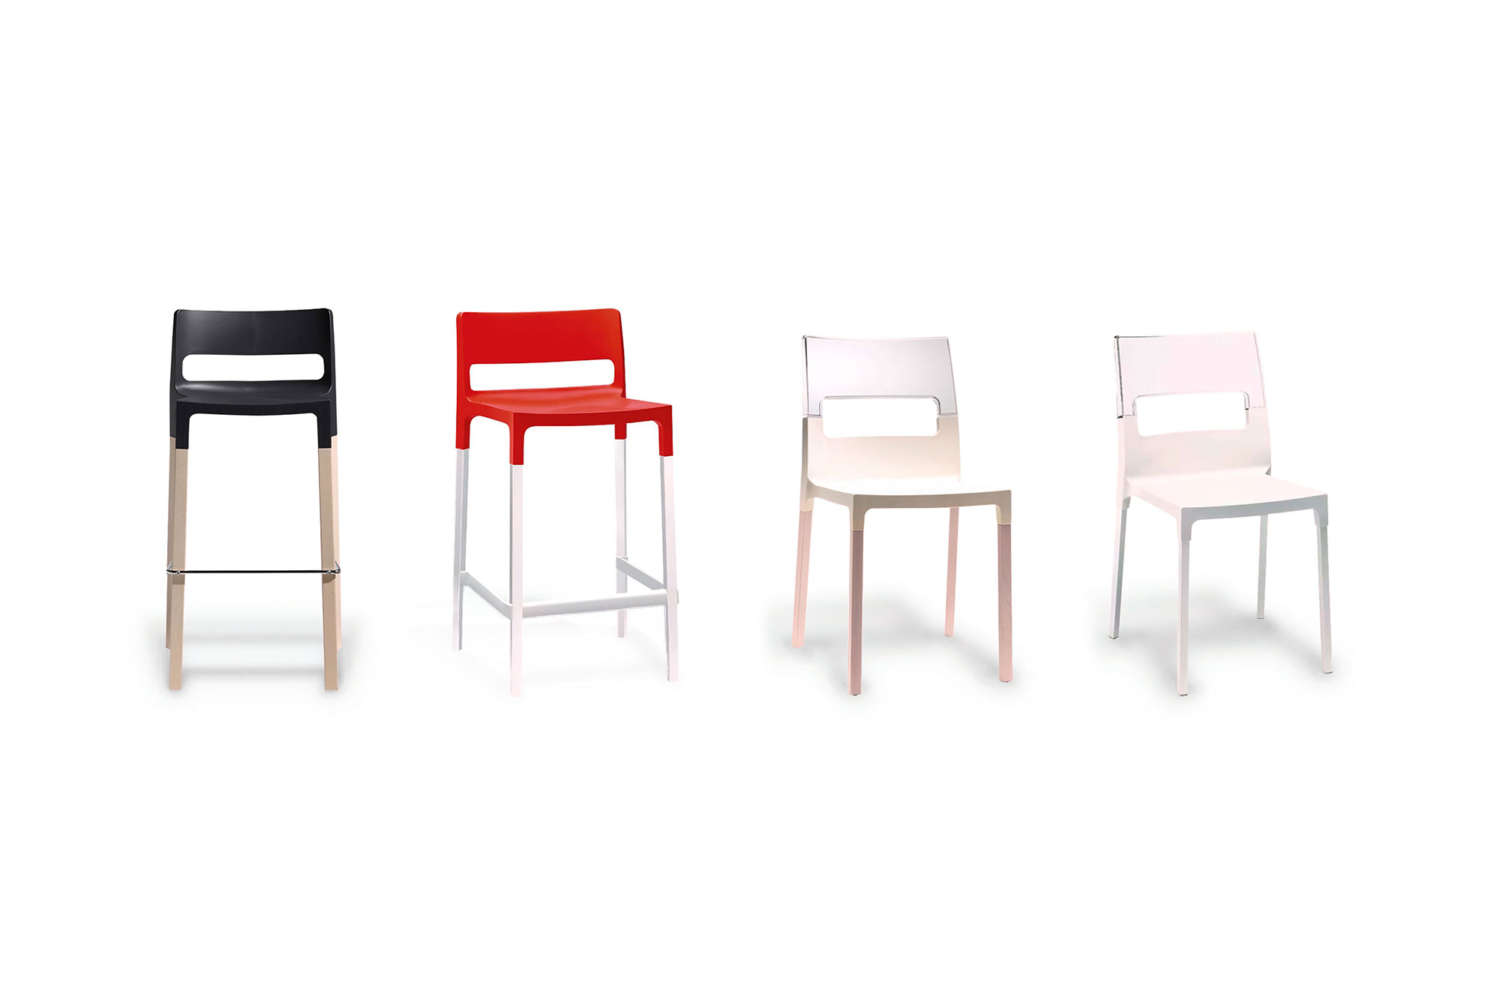 Commercial dining chairs for offices and restaurants by Divani